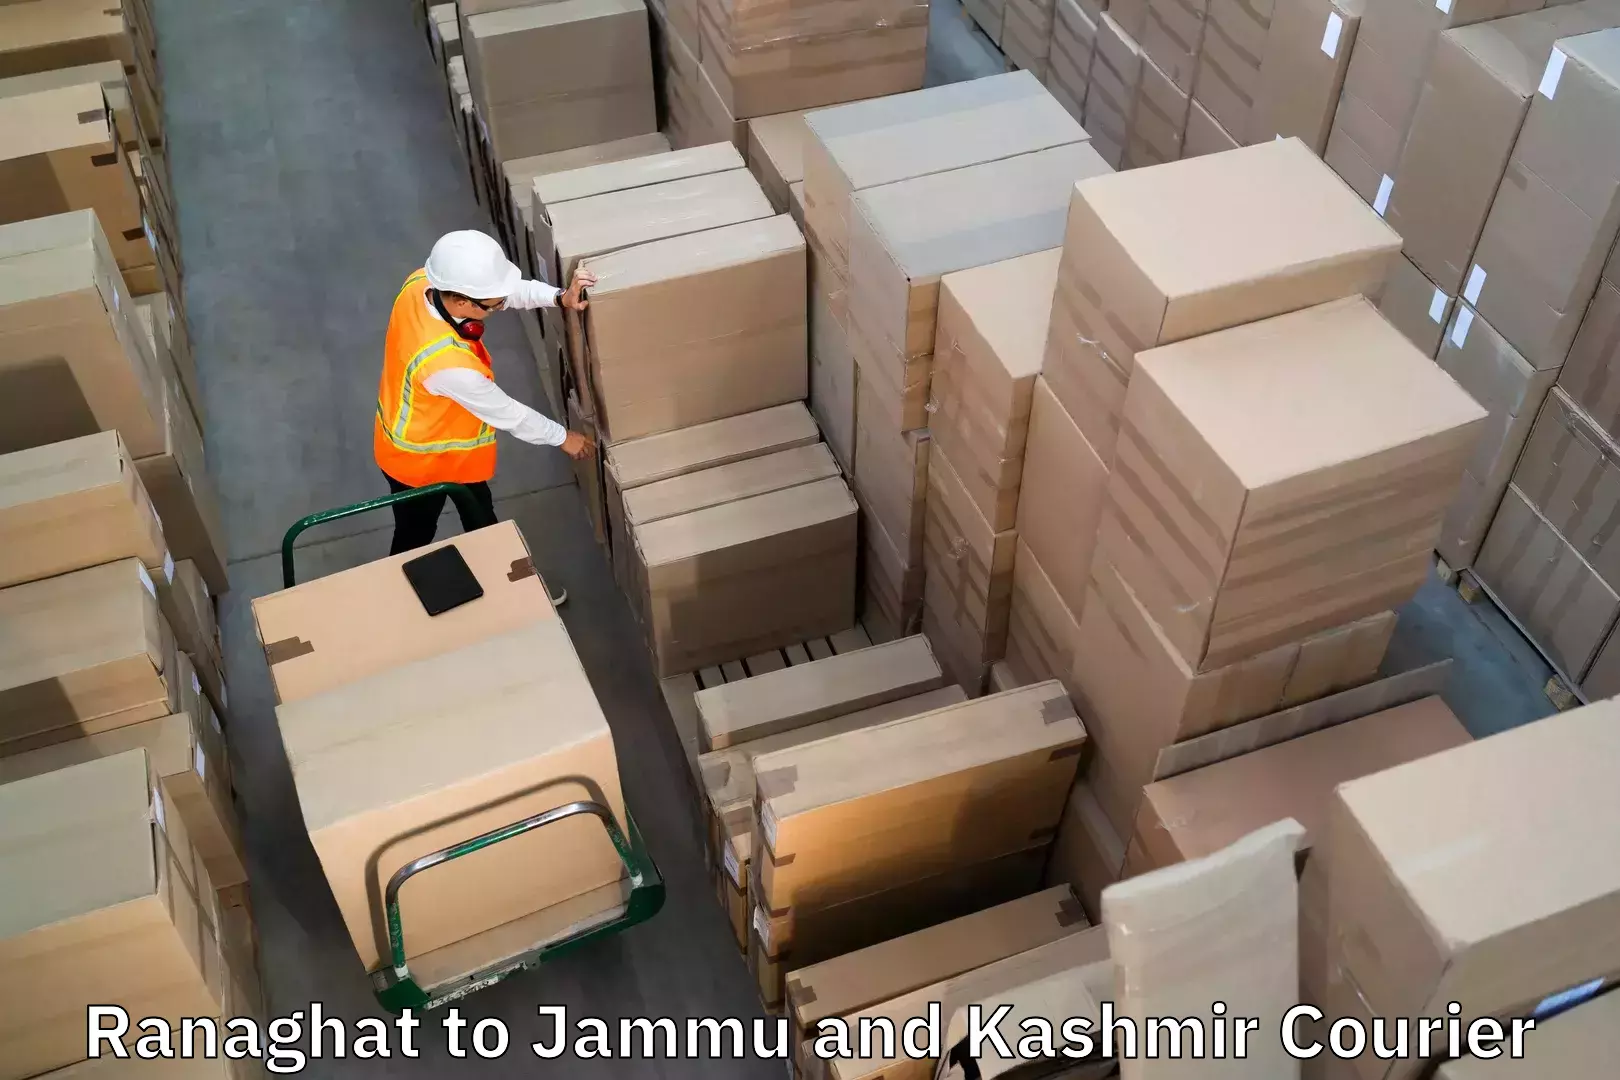 Luggage transport company Ranaghat to Pulwama